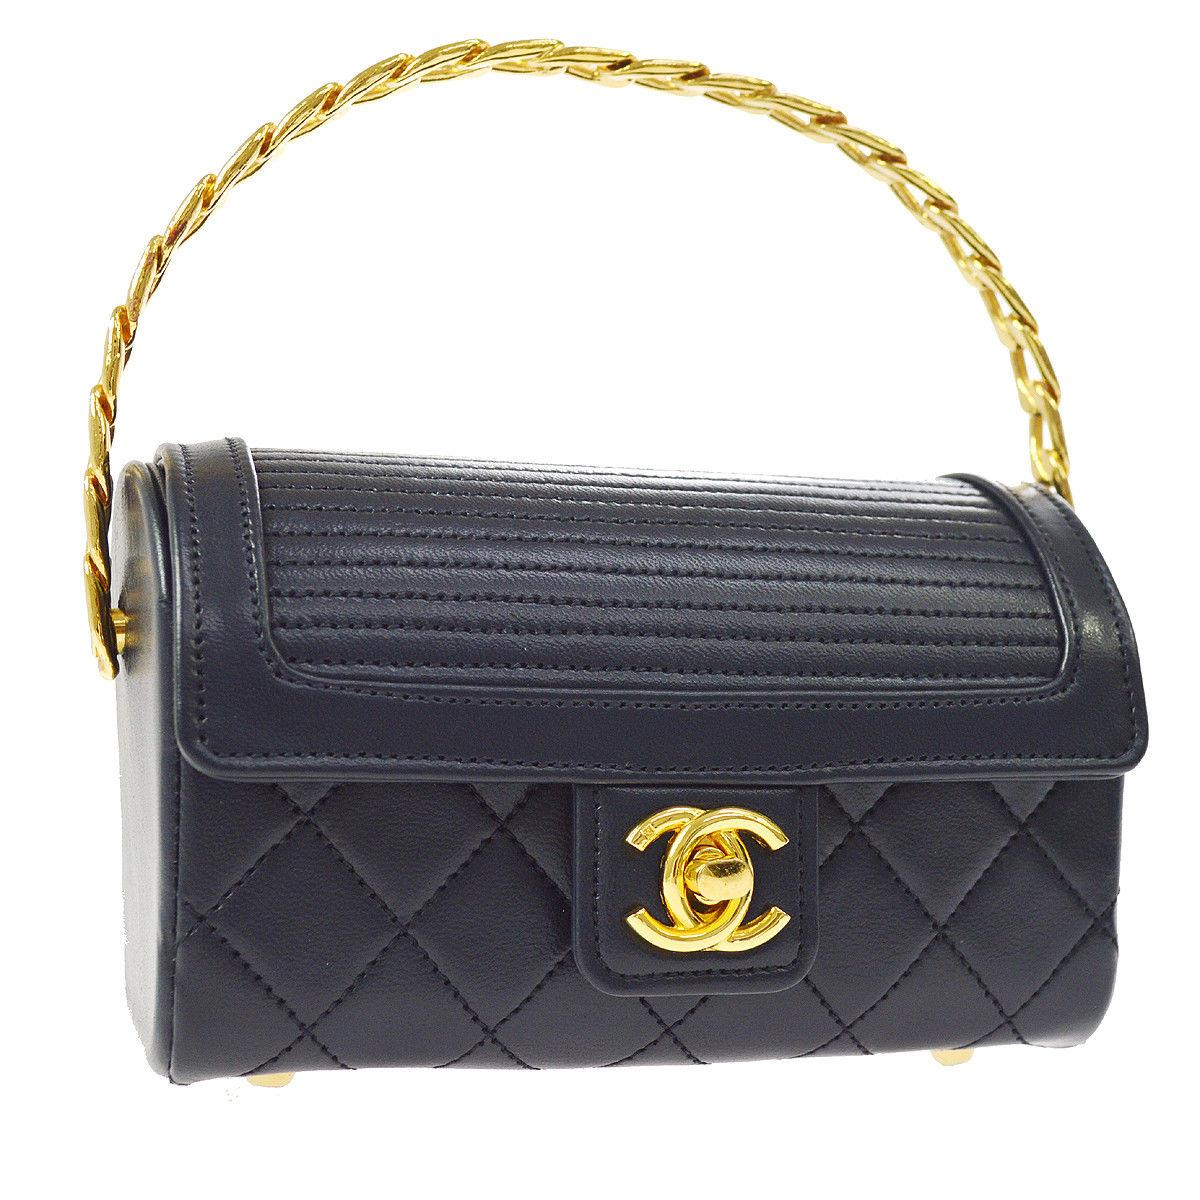 Chanel Rare Midnight Navy Blue Leather Gold Top Handle Satchel Mini Evening Bag